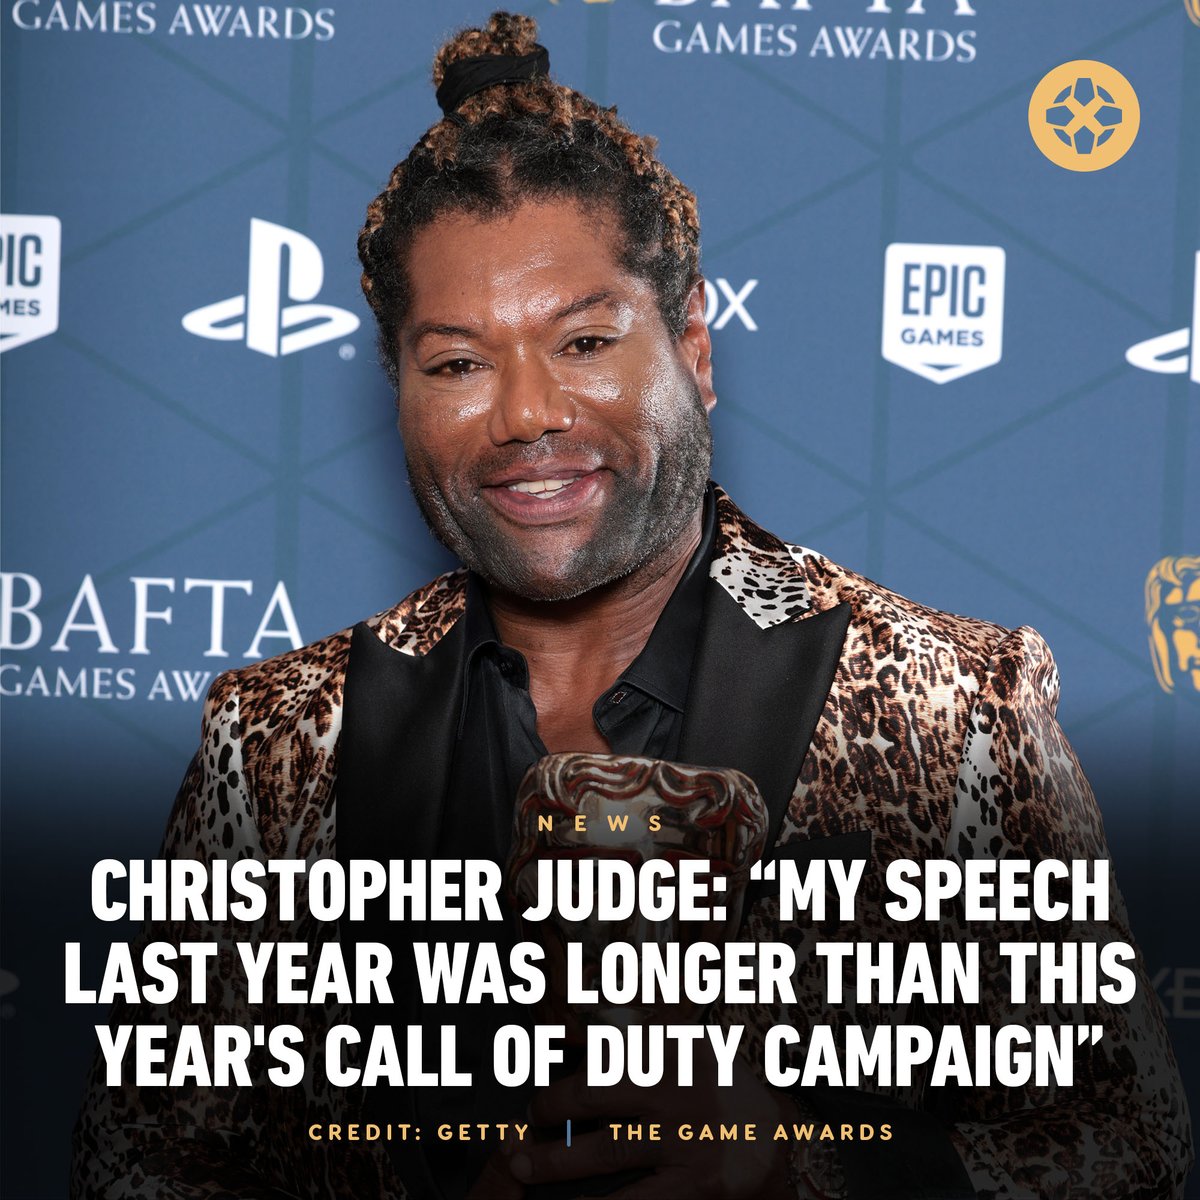 Call of Duty Devs Are a Little Peeved at Christopher Judge's Dig